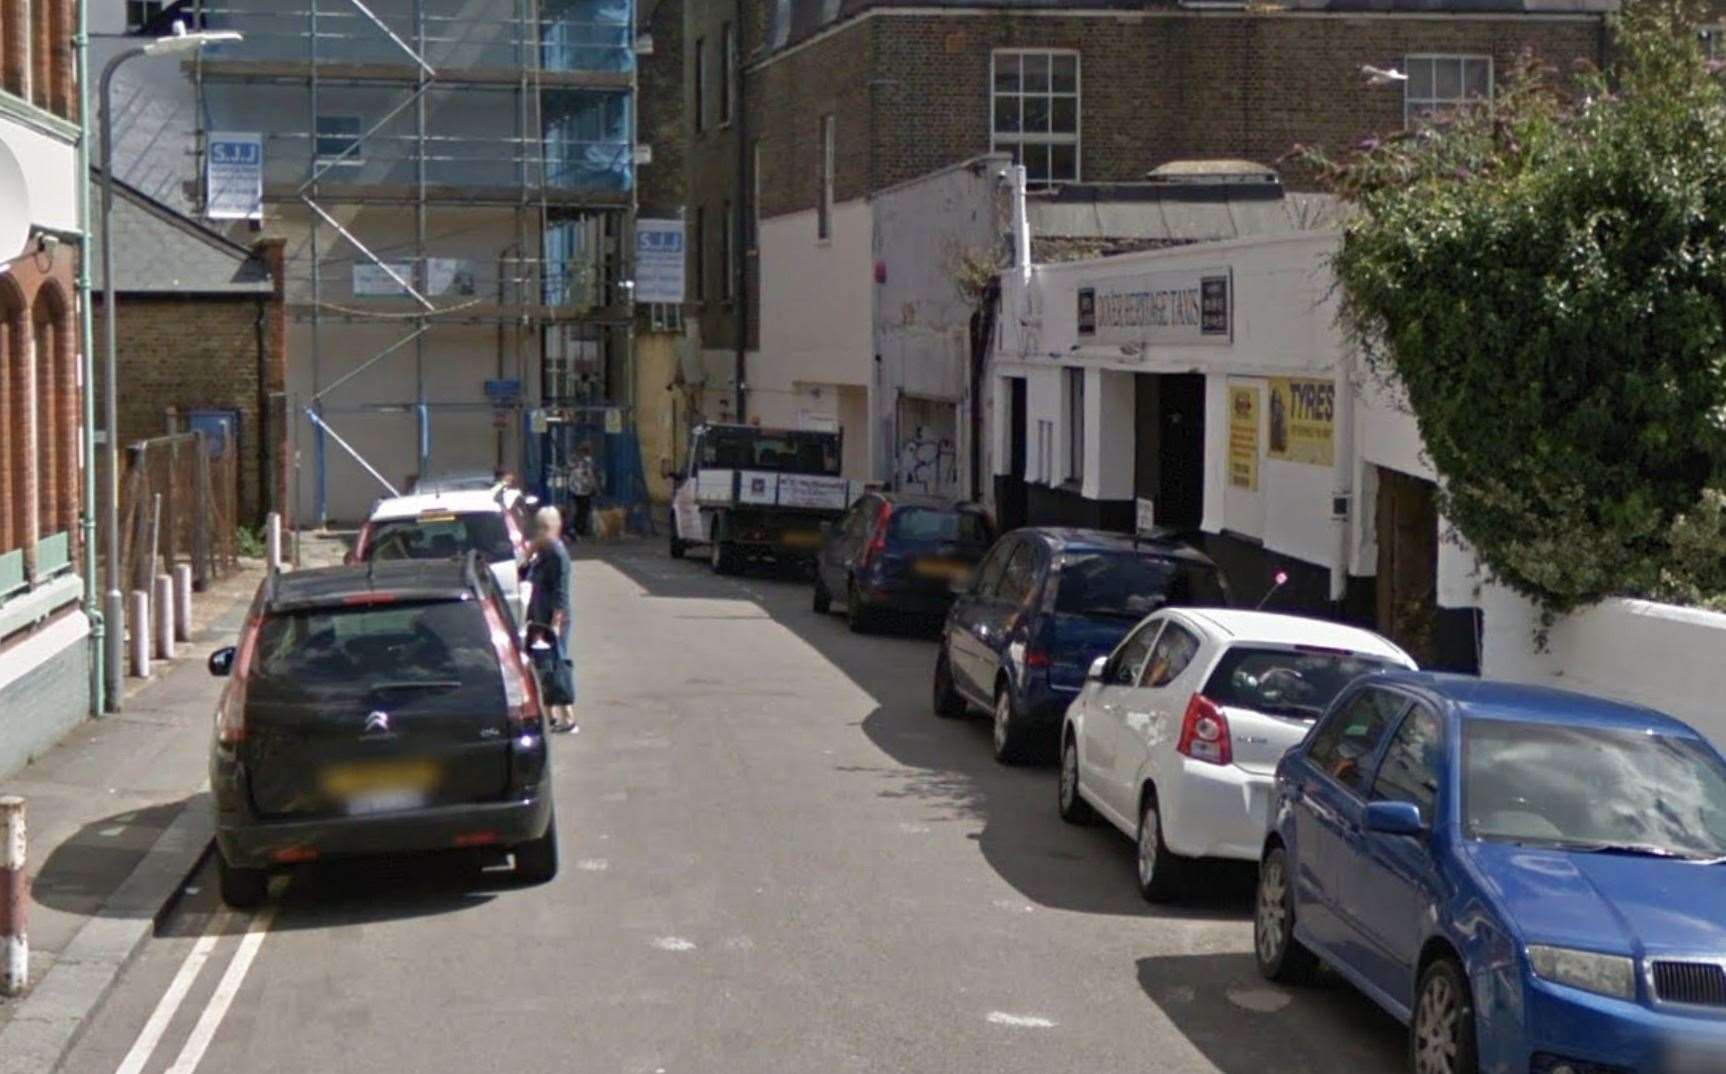 A woman was reportedly sexually assaulted in a car in New Street, Dover. Photo: Google